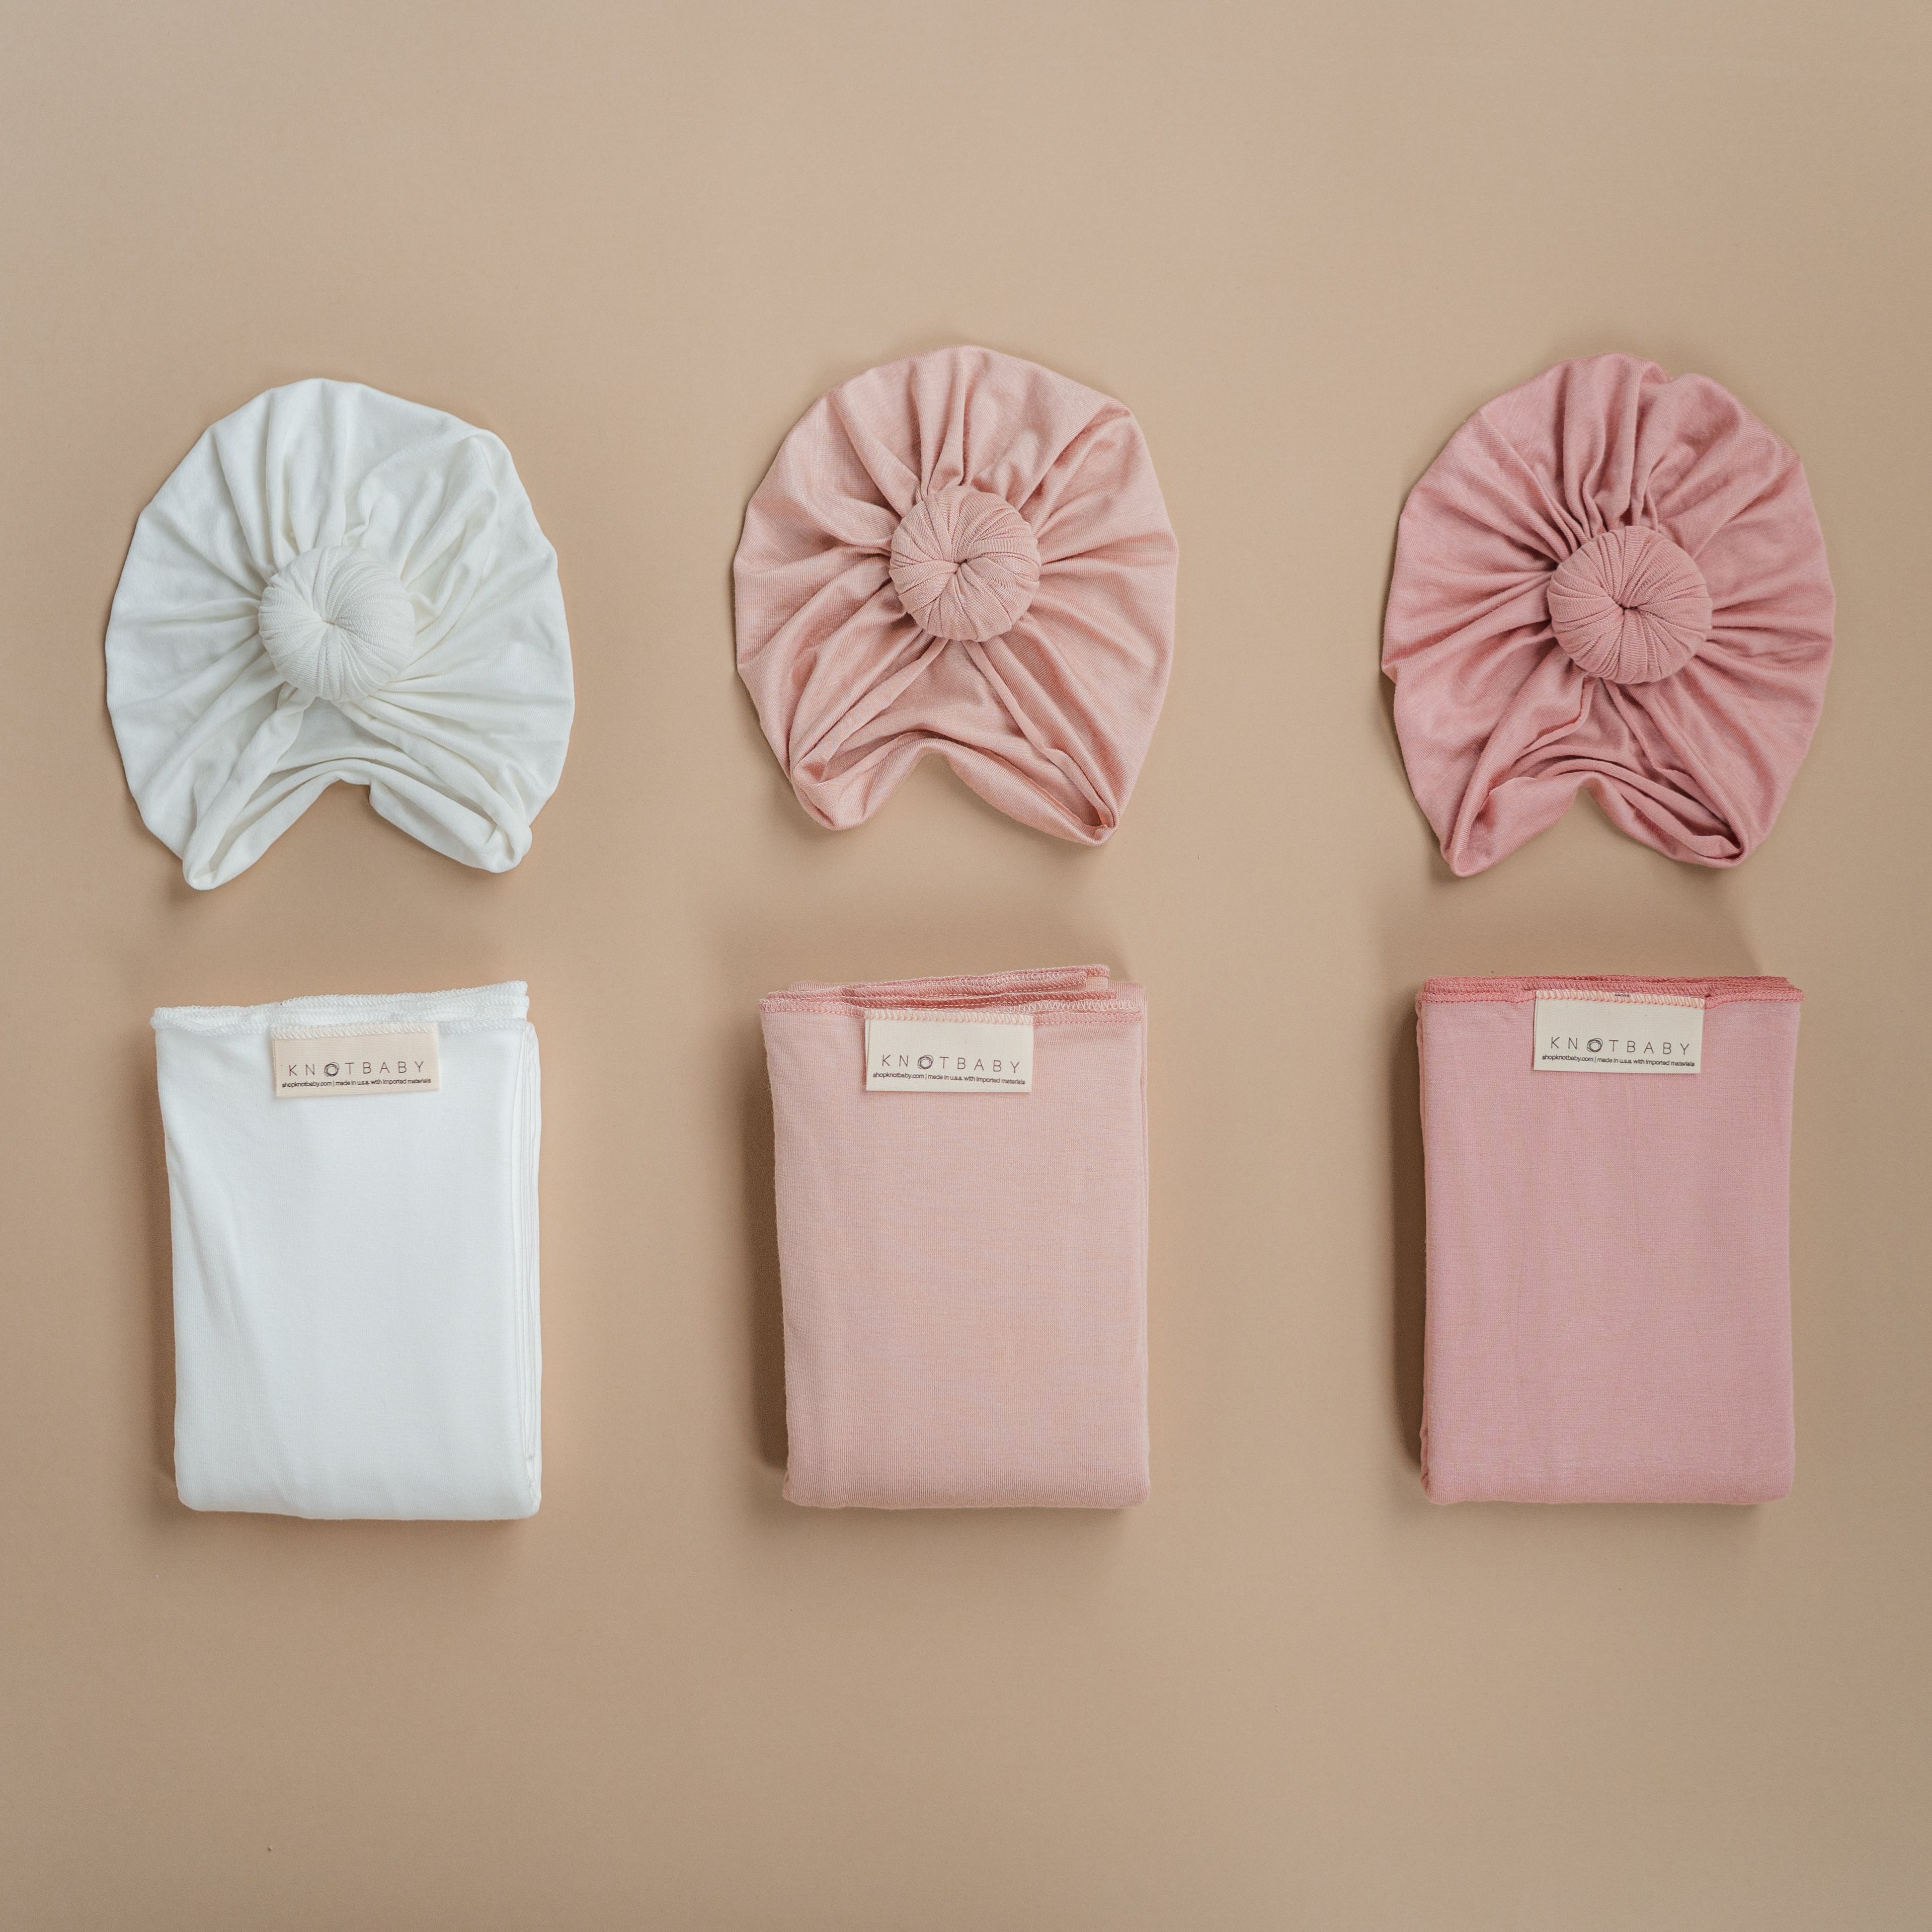 Meet Your Bundle- 3 Headwrap and Swaddle Sets in "It's a girl"